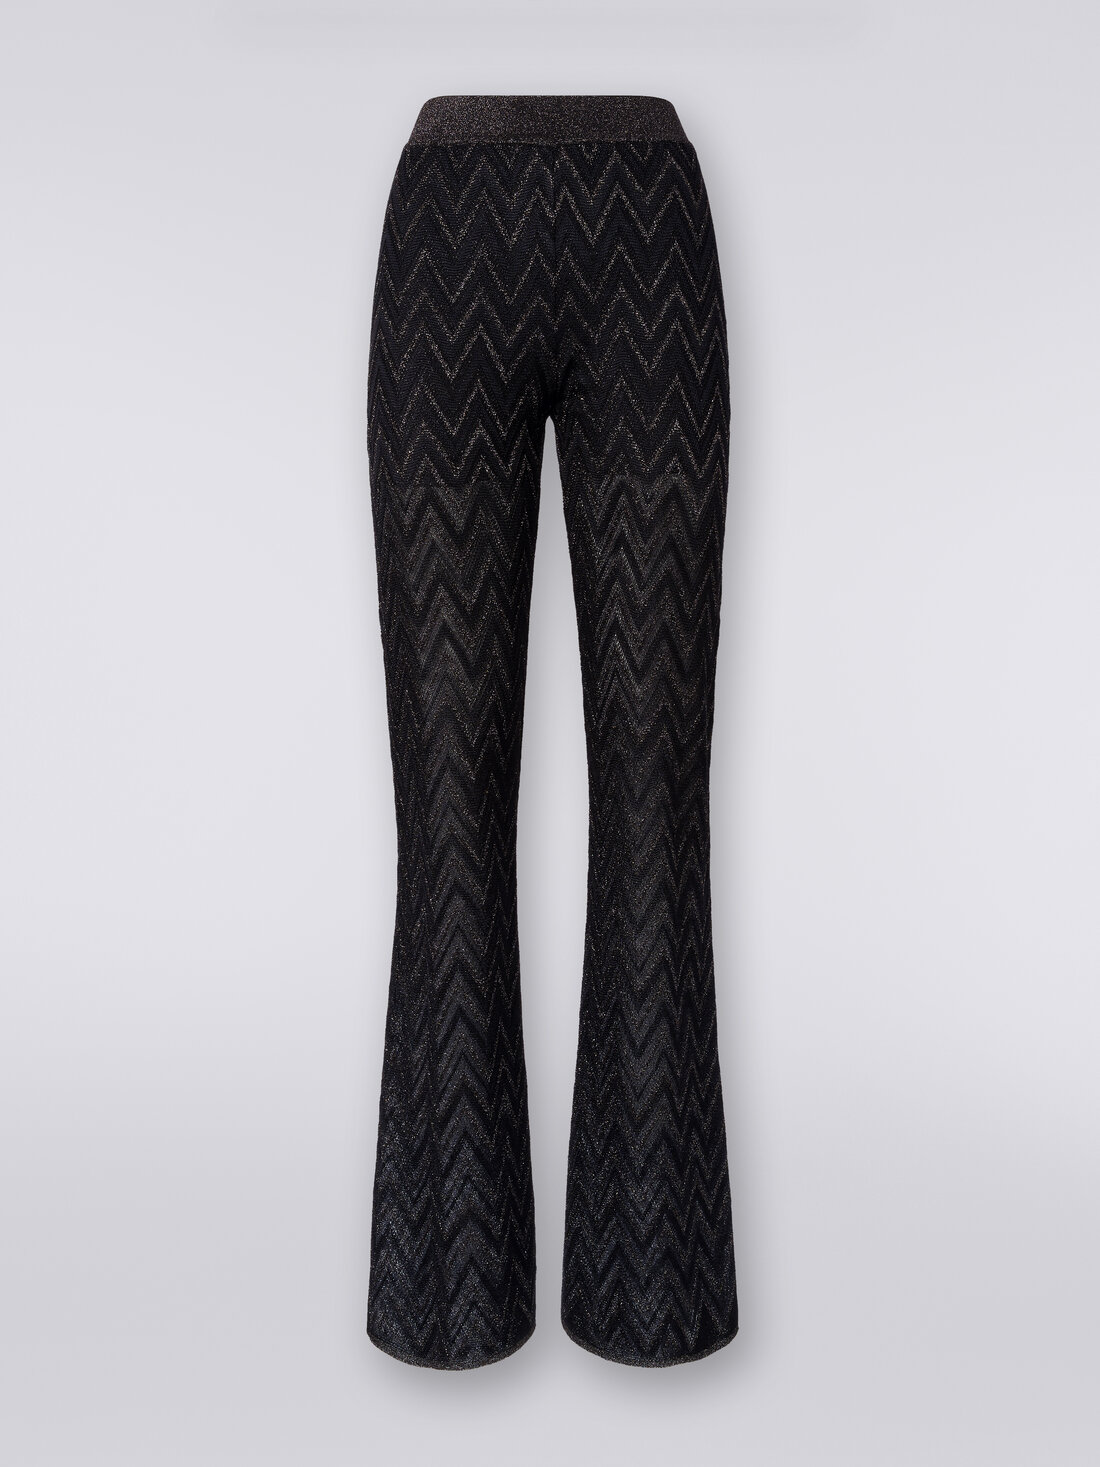 Trousers in zigzag viscose knit with lurex, Black    - DS24SI0QBK034GSM9AQ - 0